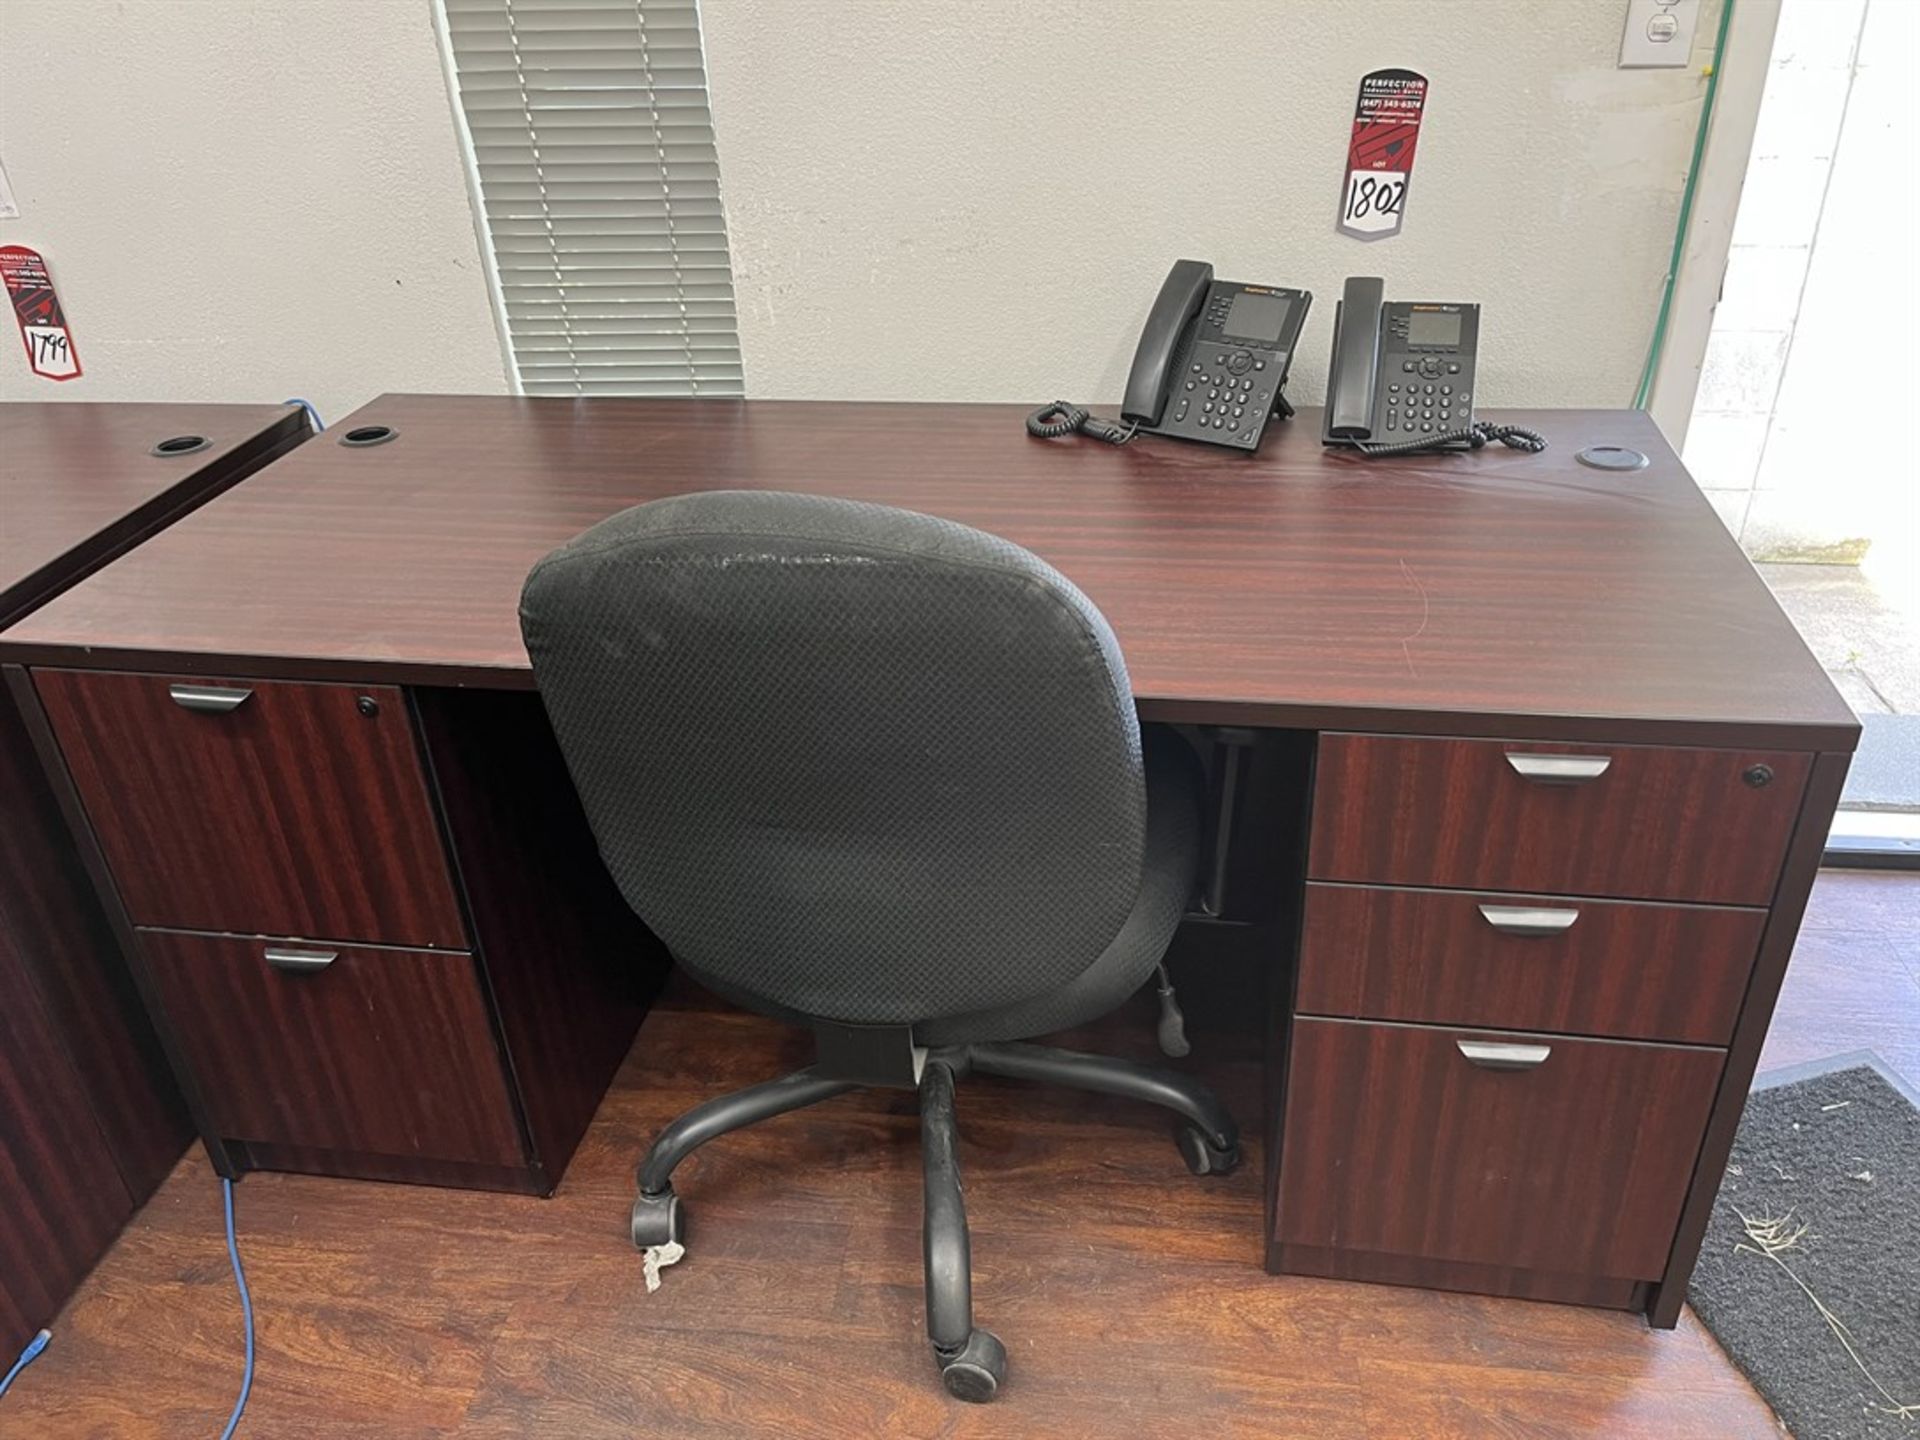 Lot consisting of Desk, Table, File Cabinet (Located in IT Building)